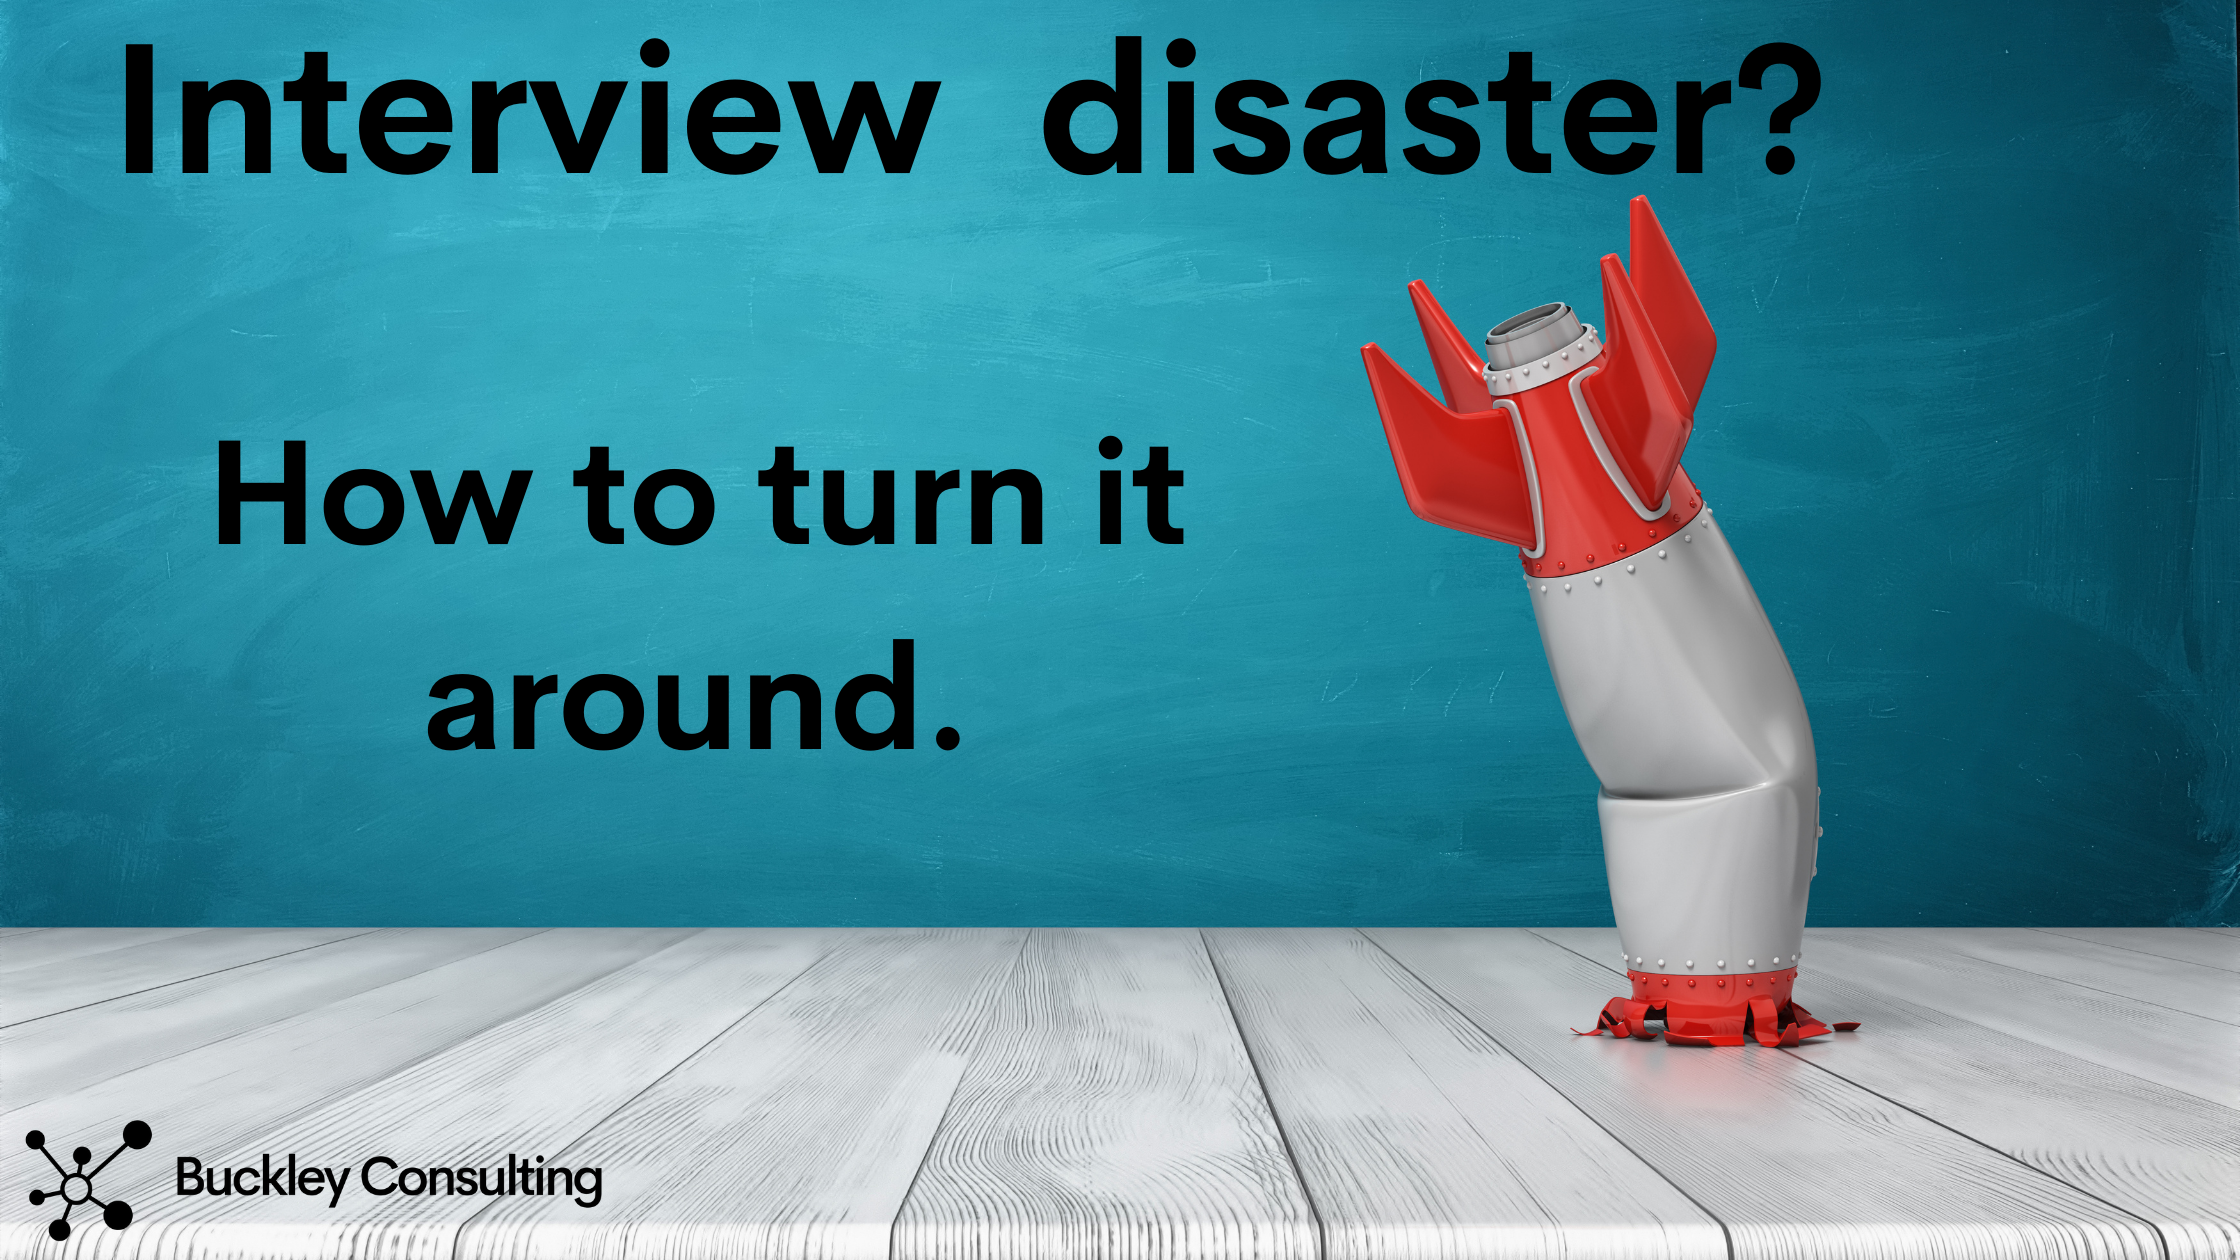 Interview disaster? How to turn it around.